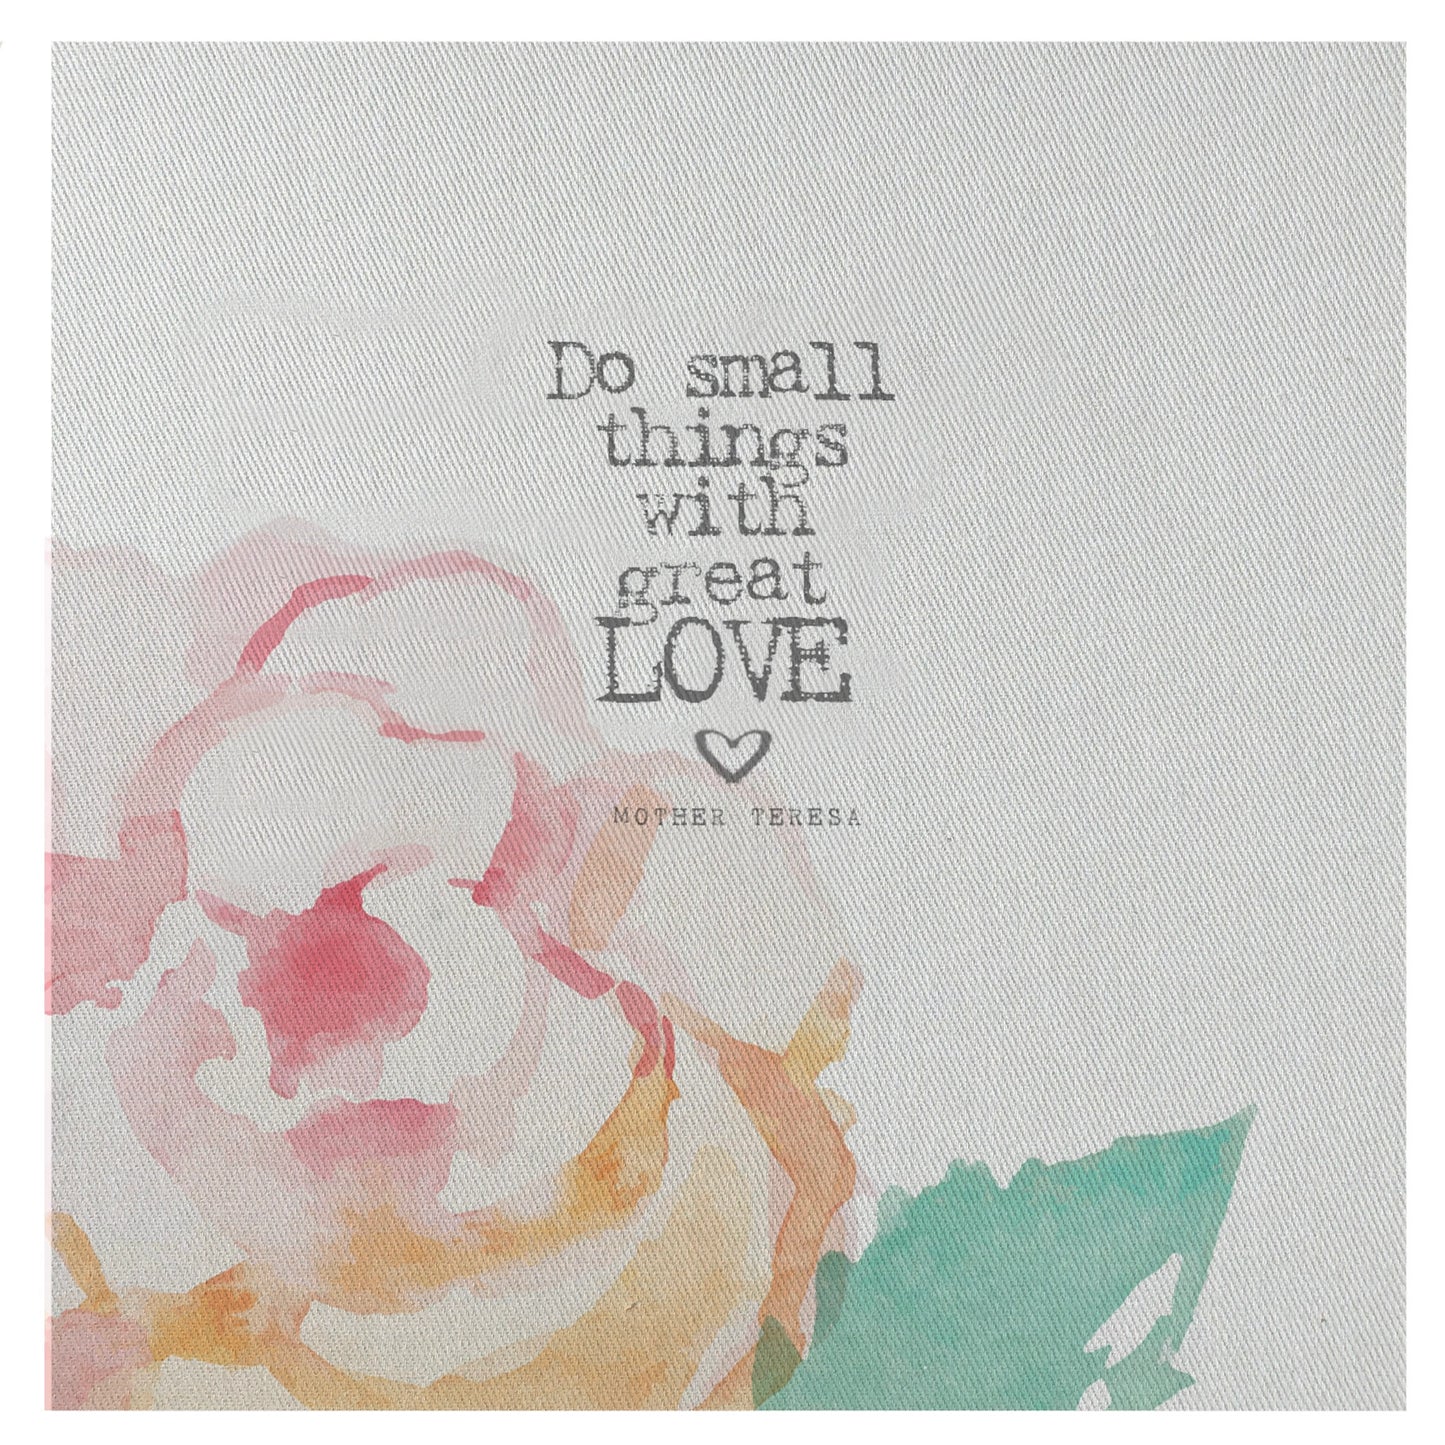 Mini Canvas, Do Small Things with Great Love, Shelf Decor